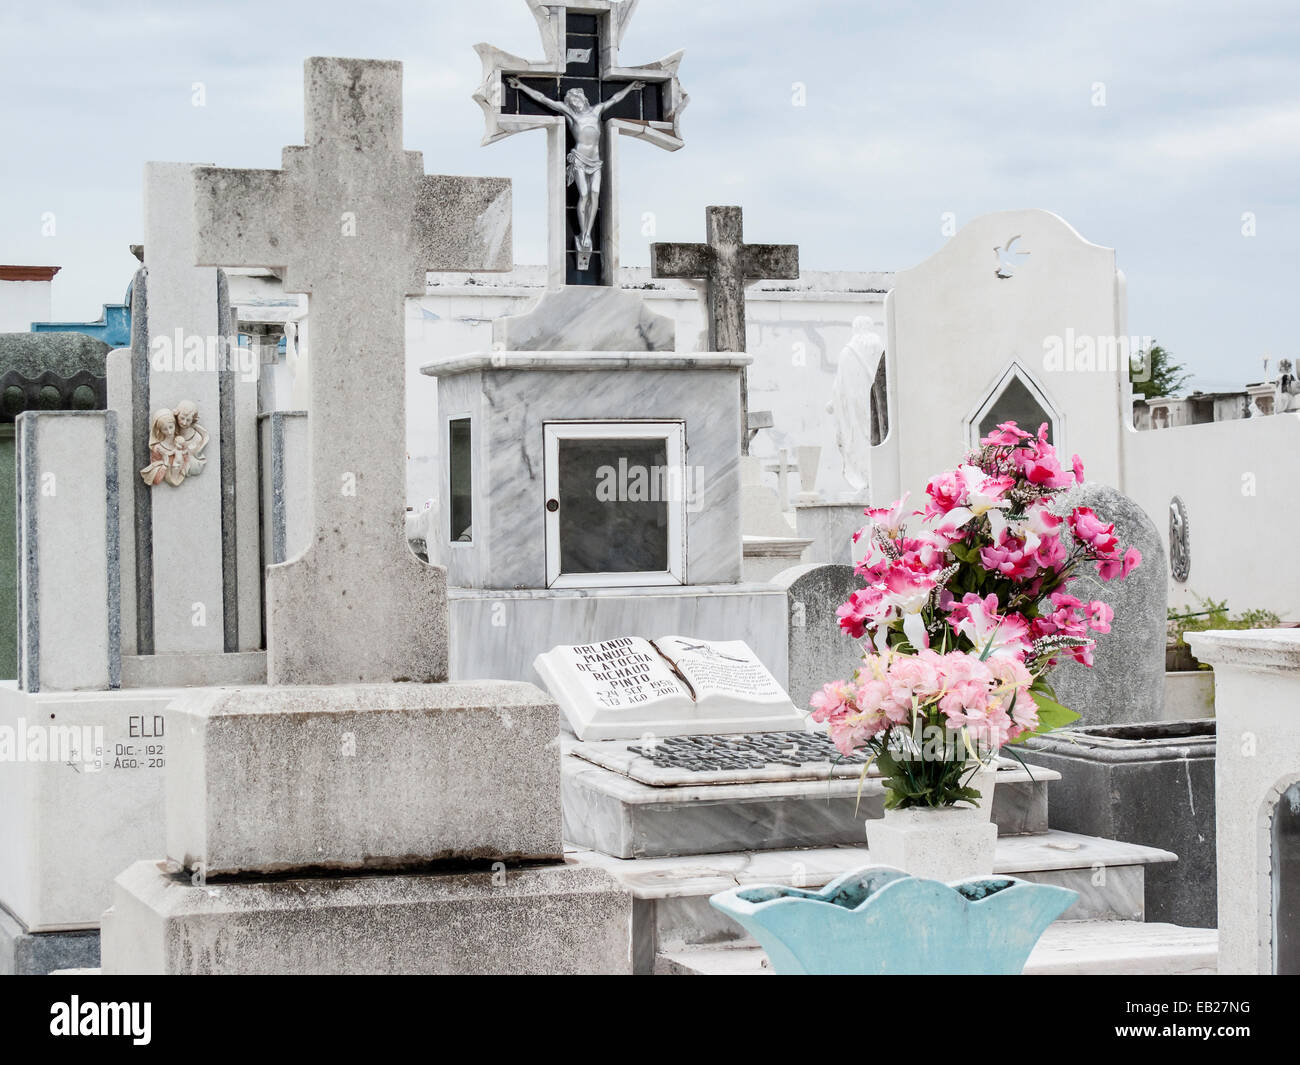 Marble and stone Christian graves with crosses and grave offering of bright pink flowers in the Panteon de San Roman cemetery, Campeche, Mexico. Stock Photo